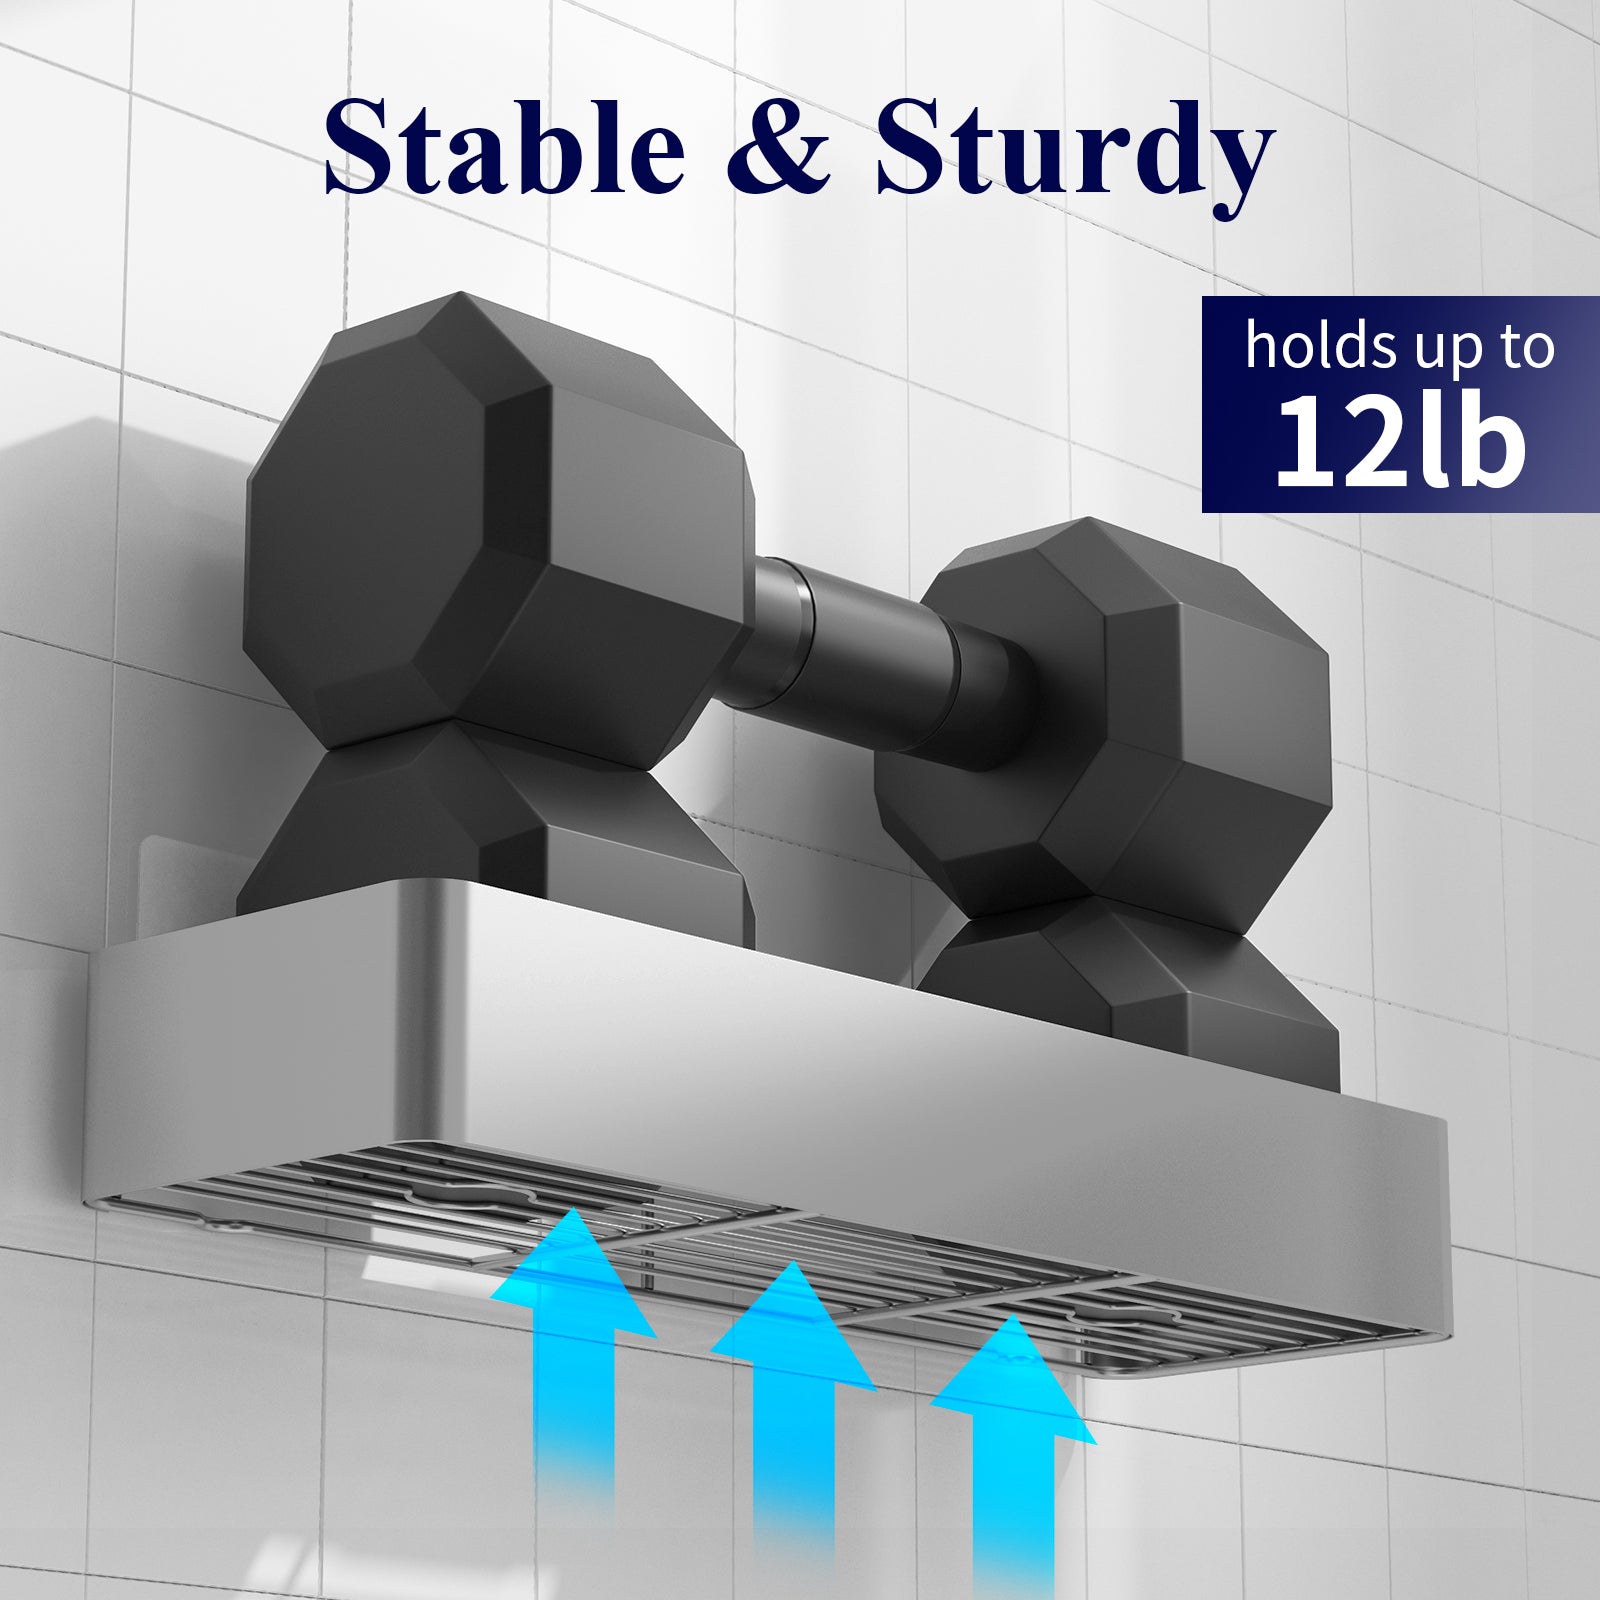 Kitsure Shower Caddy 2 Pack - Rustproof Self-Adhesive Shower Shelves with  Large Capacity, Drill-Fre - Bath Caddies